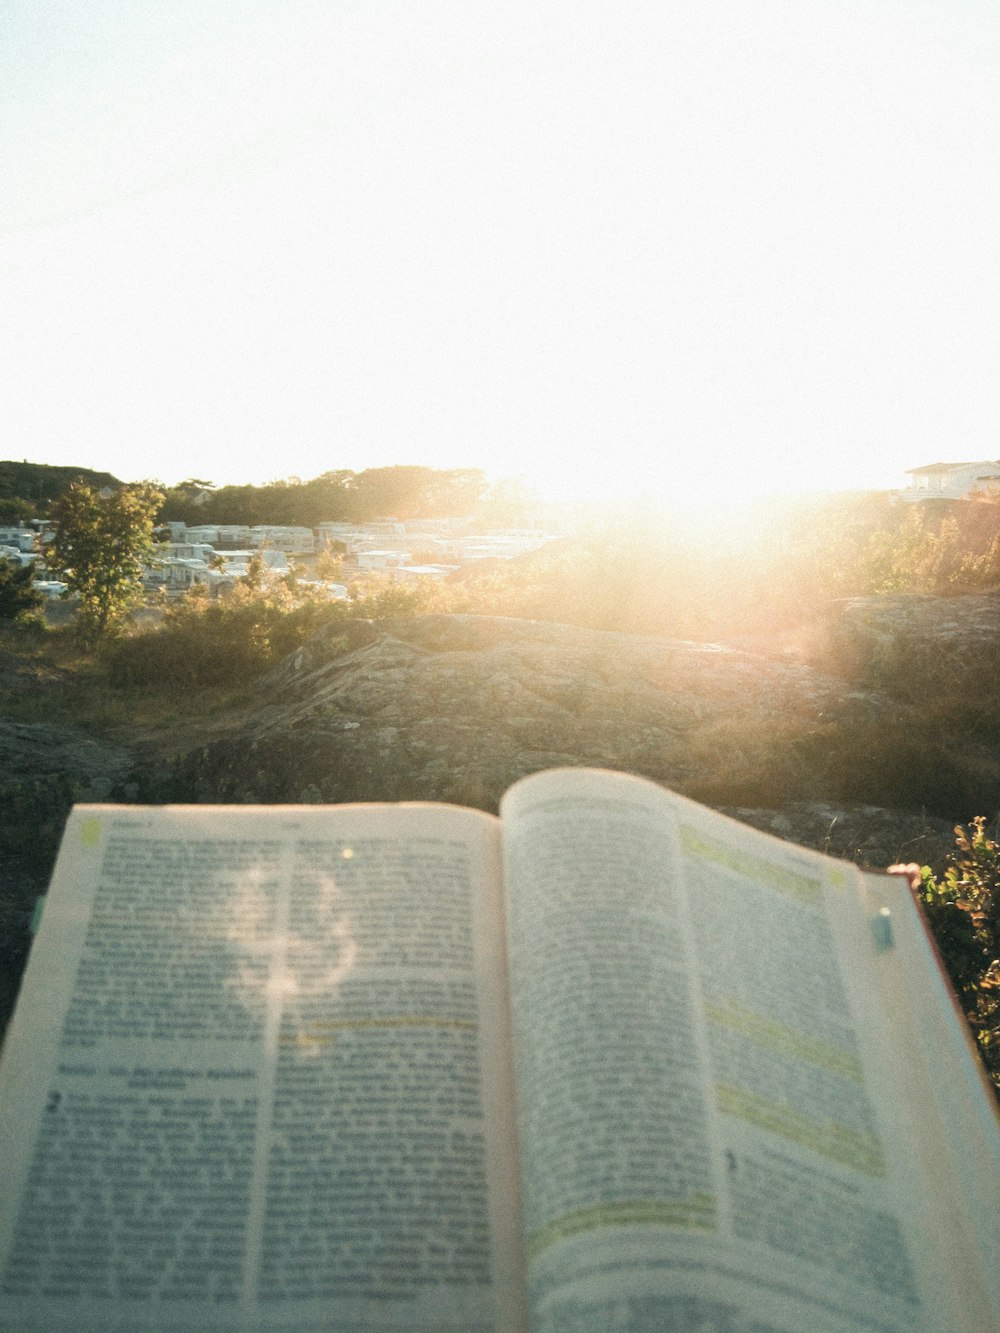 an open book sitting on top of a grass covered field